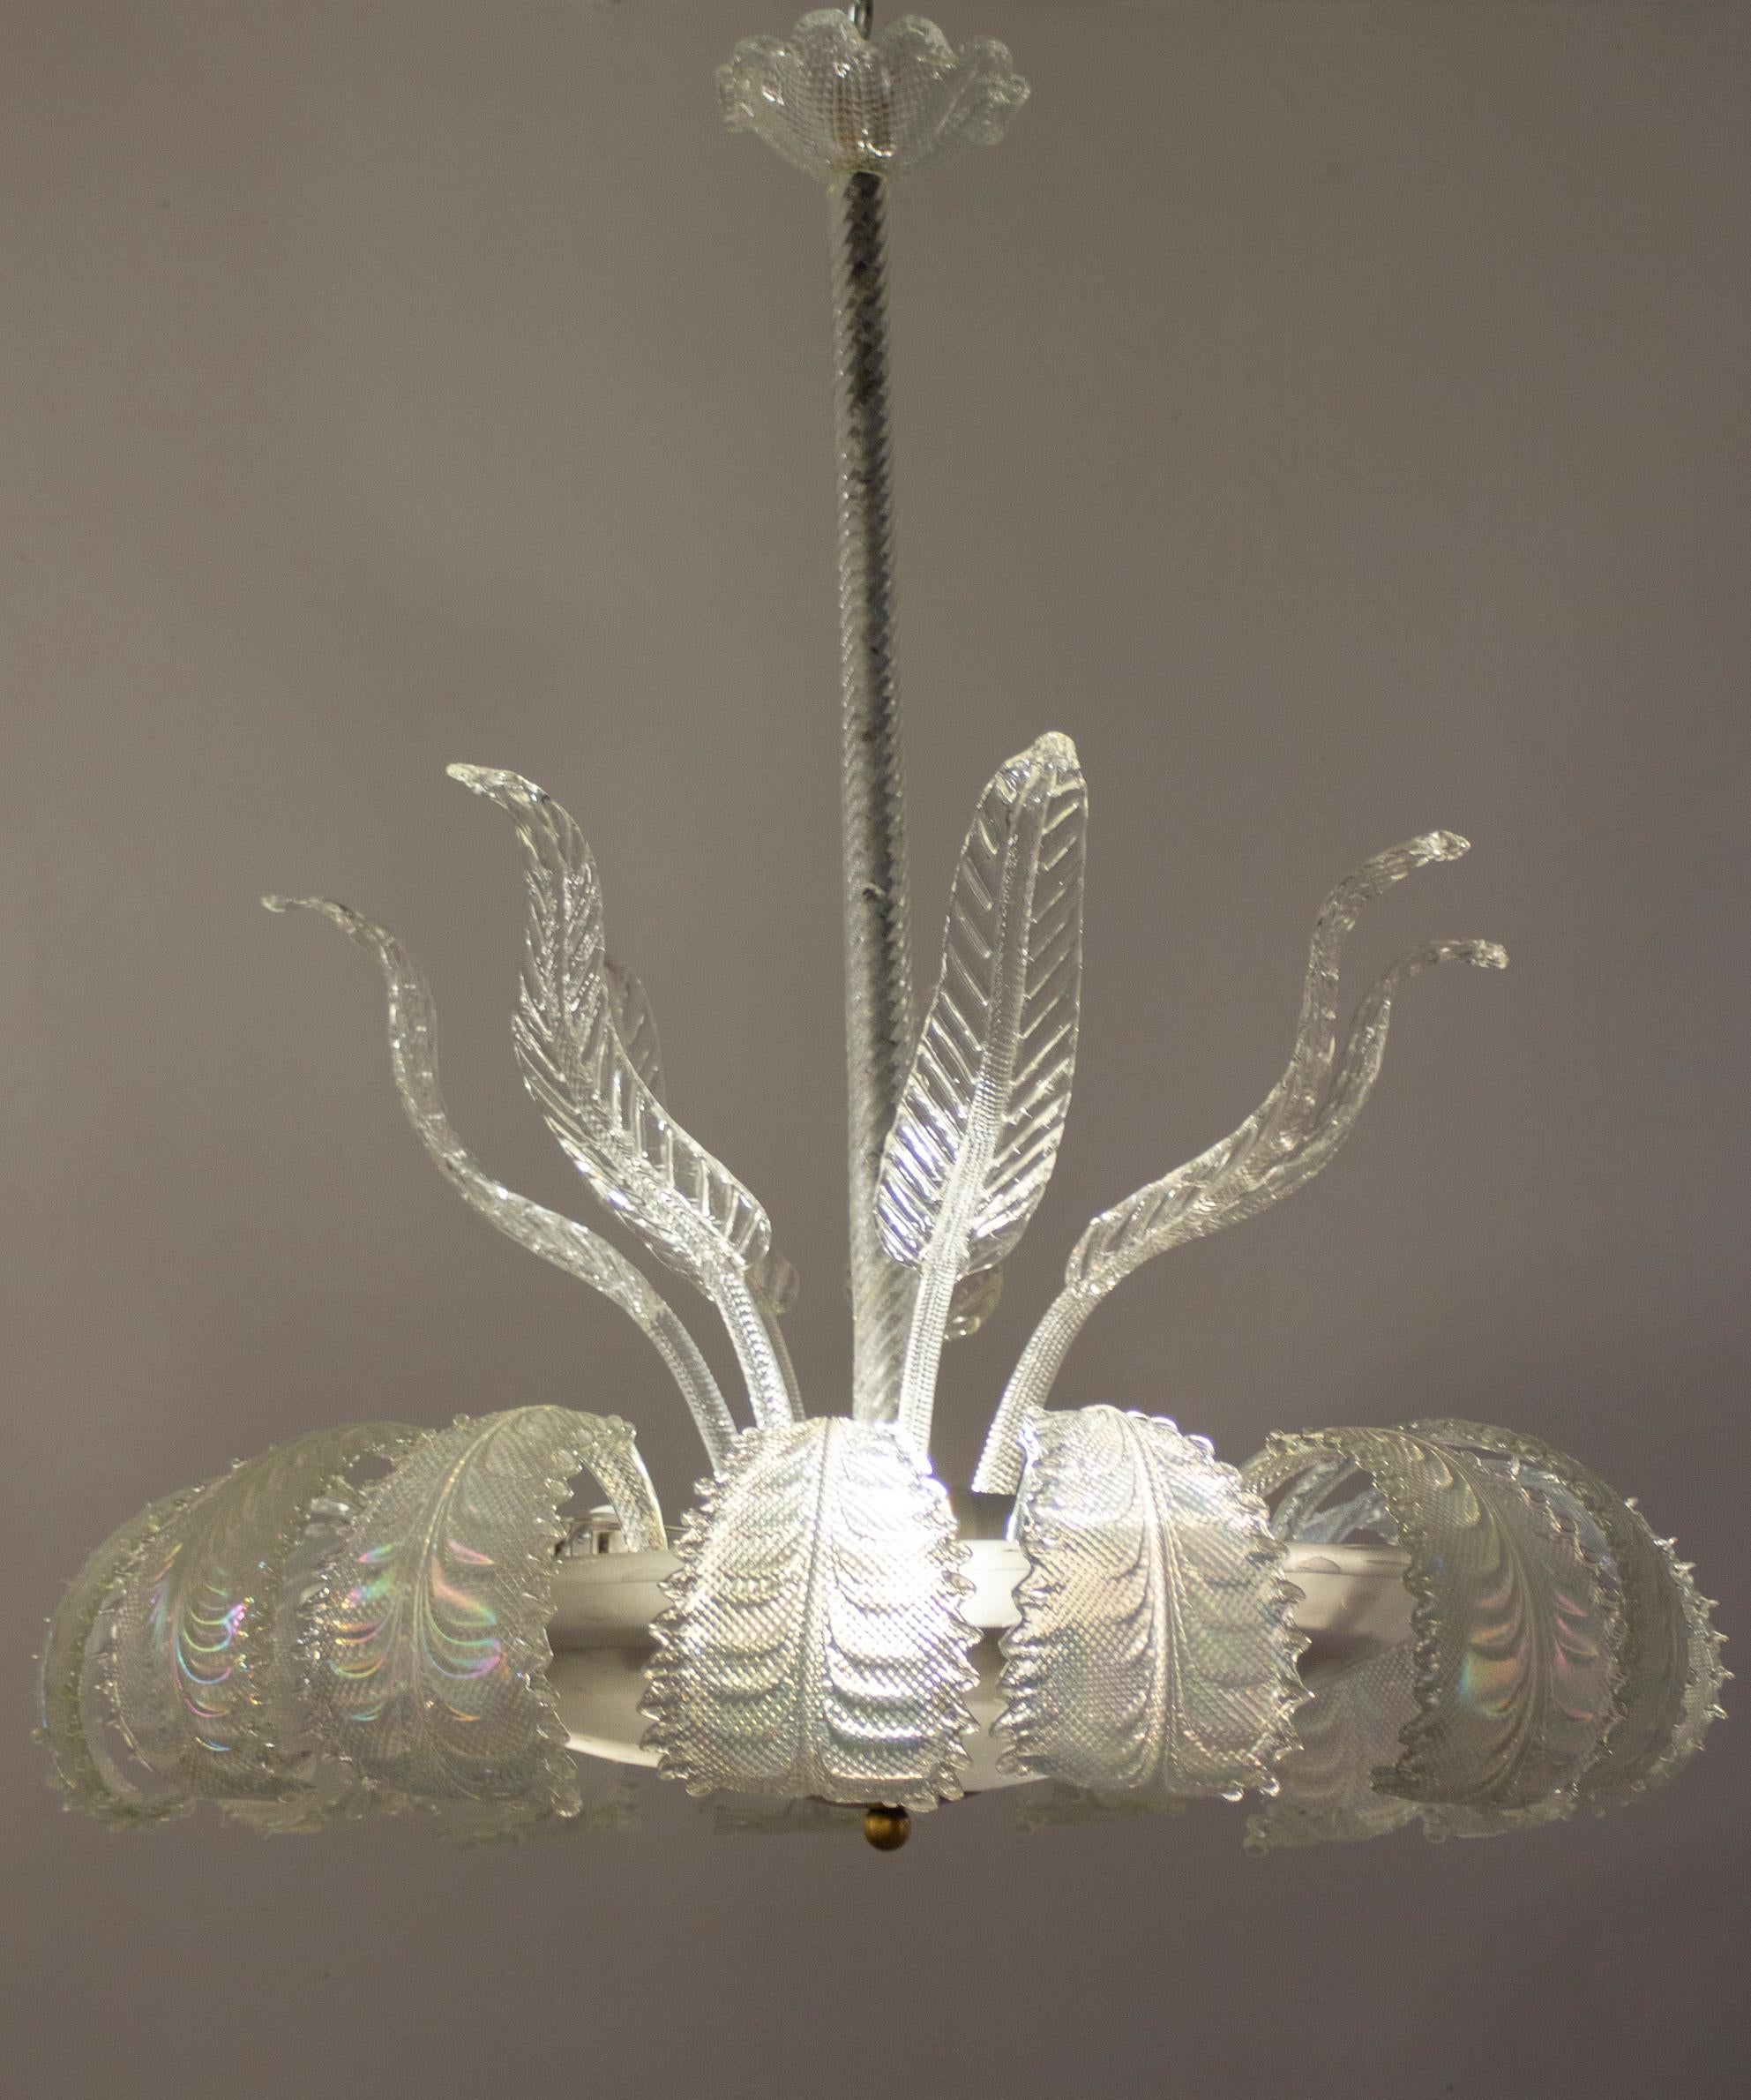 Art Deco Ninfea Iridescent Murano Glass Chandelier by Barovier Italy, 1940 For Sale 6